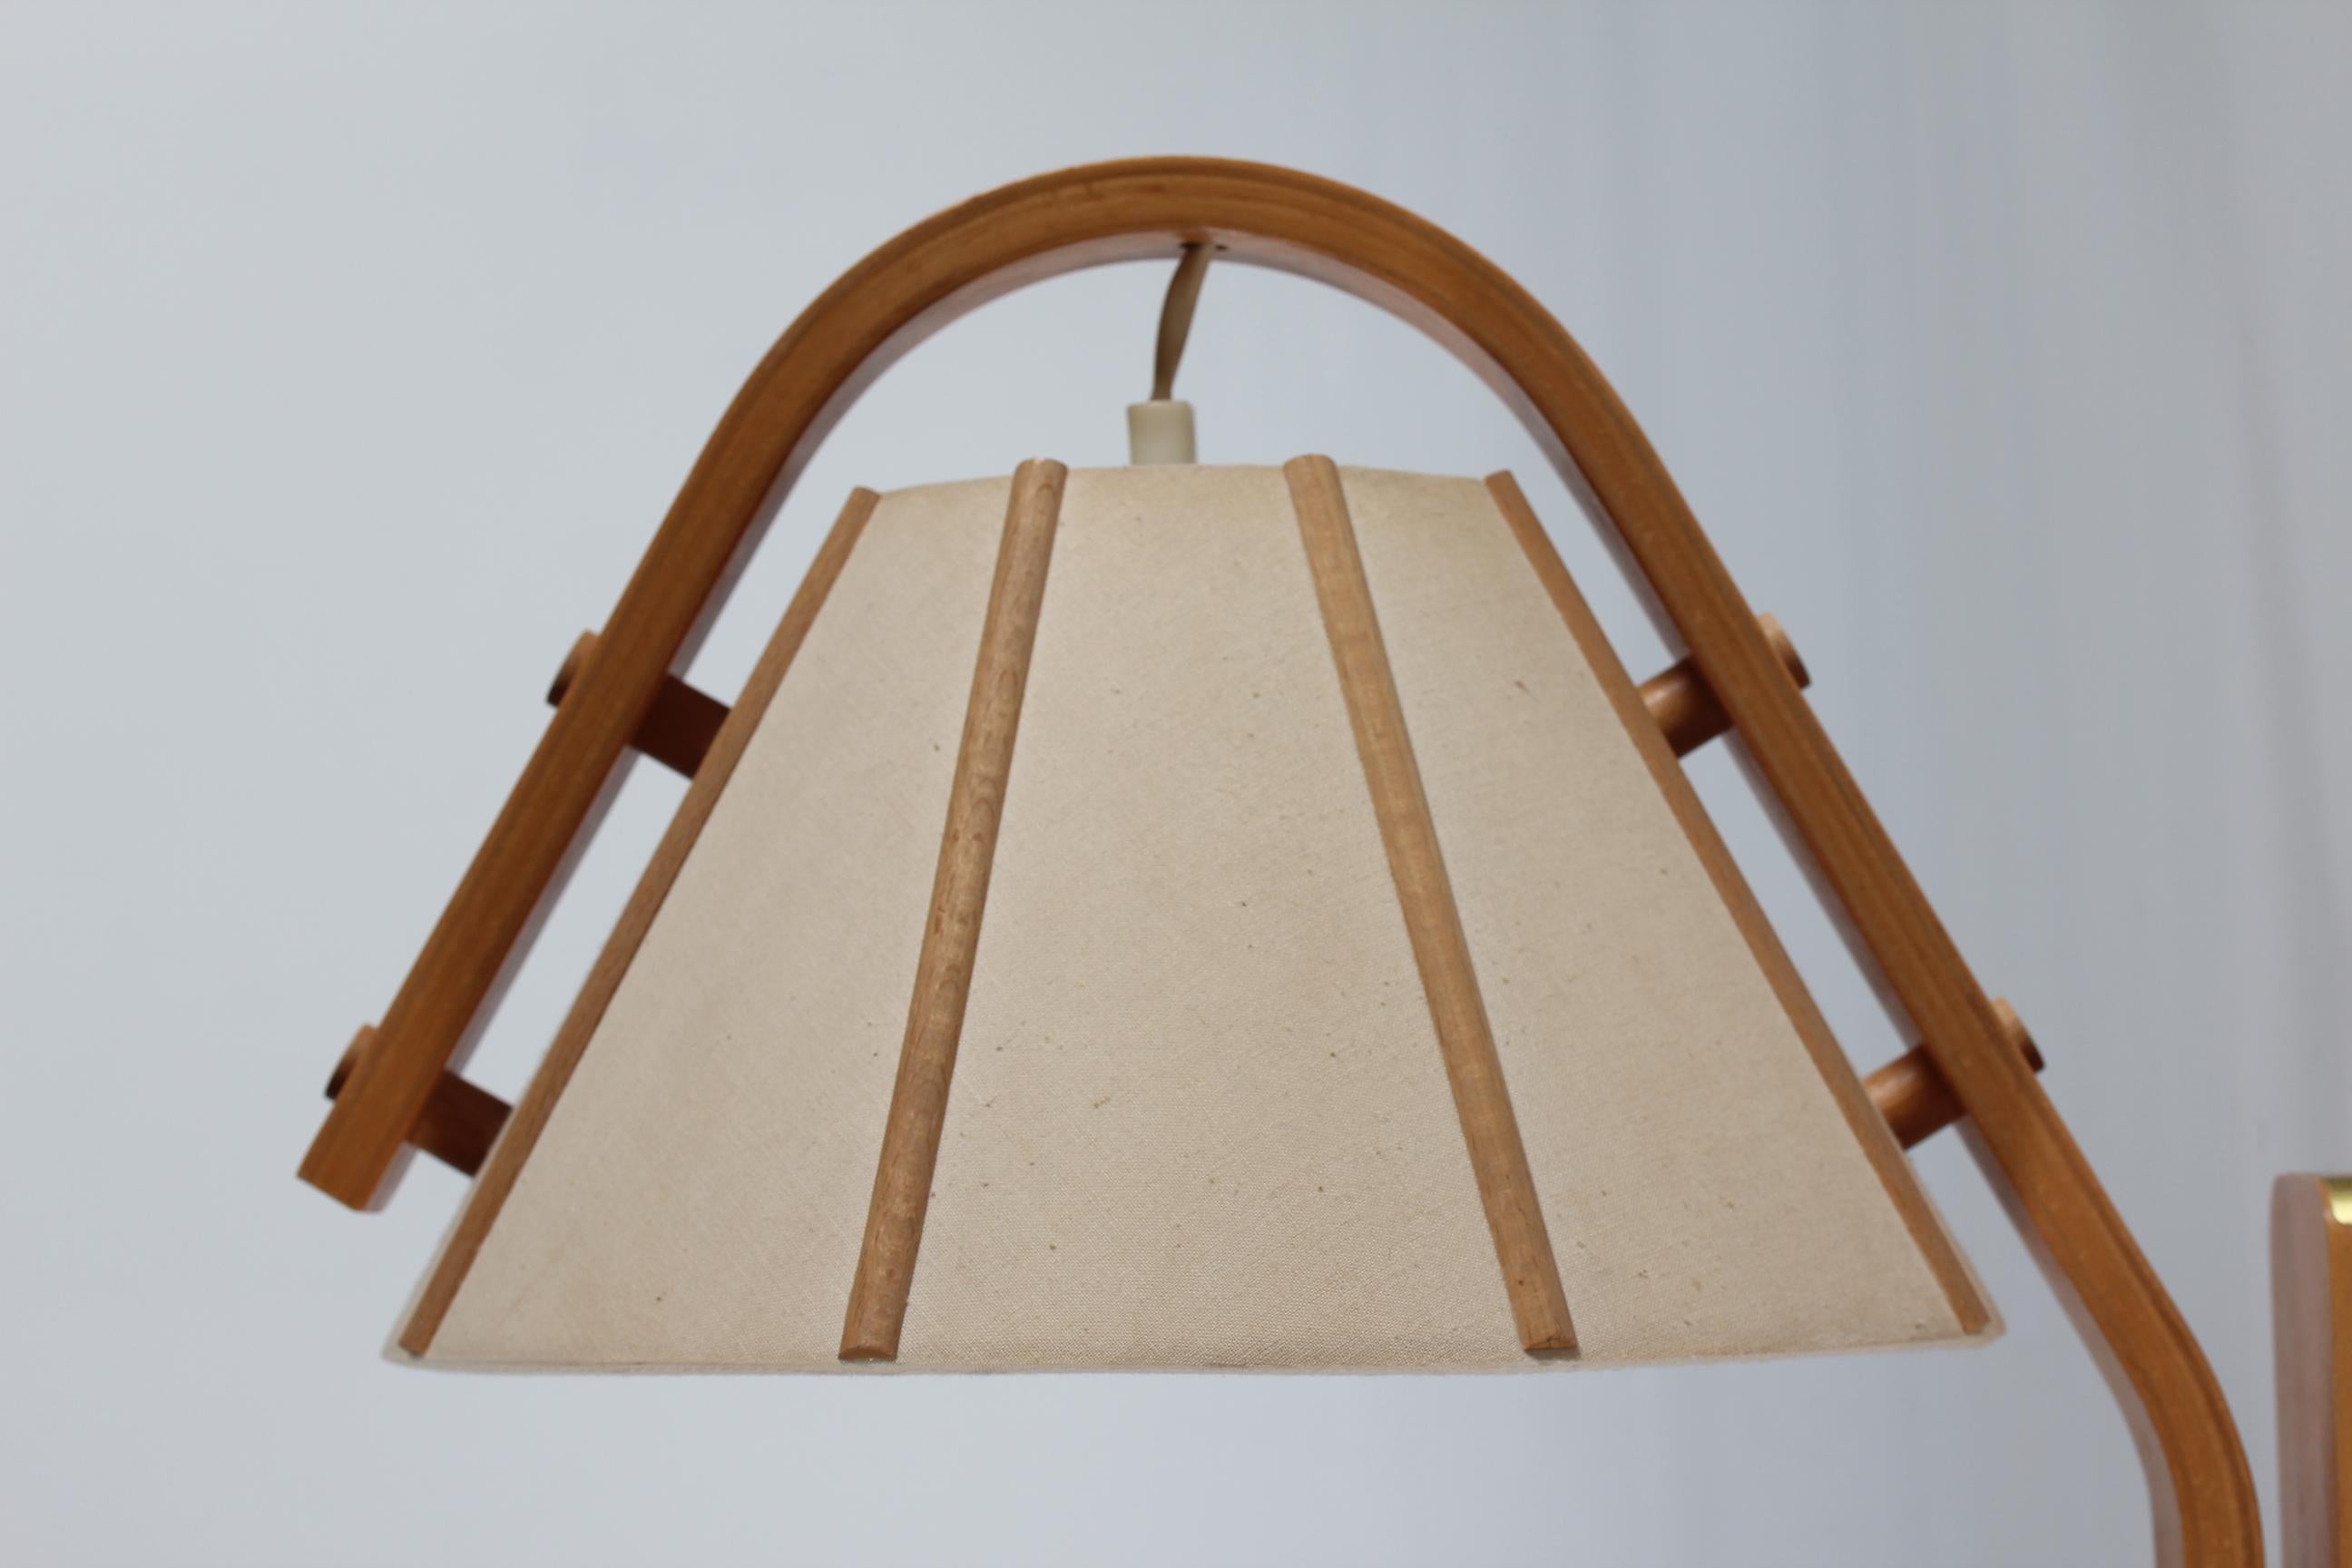 Original vintage wall lamp designed by Jan Wickelgren for Swedish lamp manufacturer Aneta in the 1970s.

The wall light is made of beech with lacquer and the shade is made of natural colored linen fabric which spreads a cozy warm light.

The